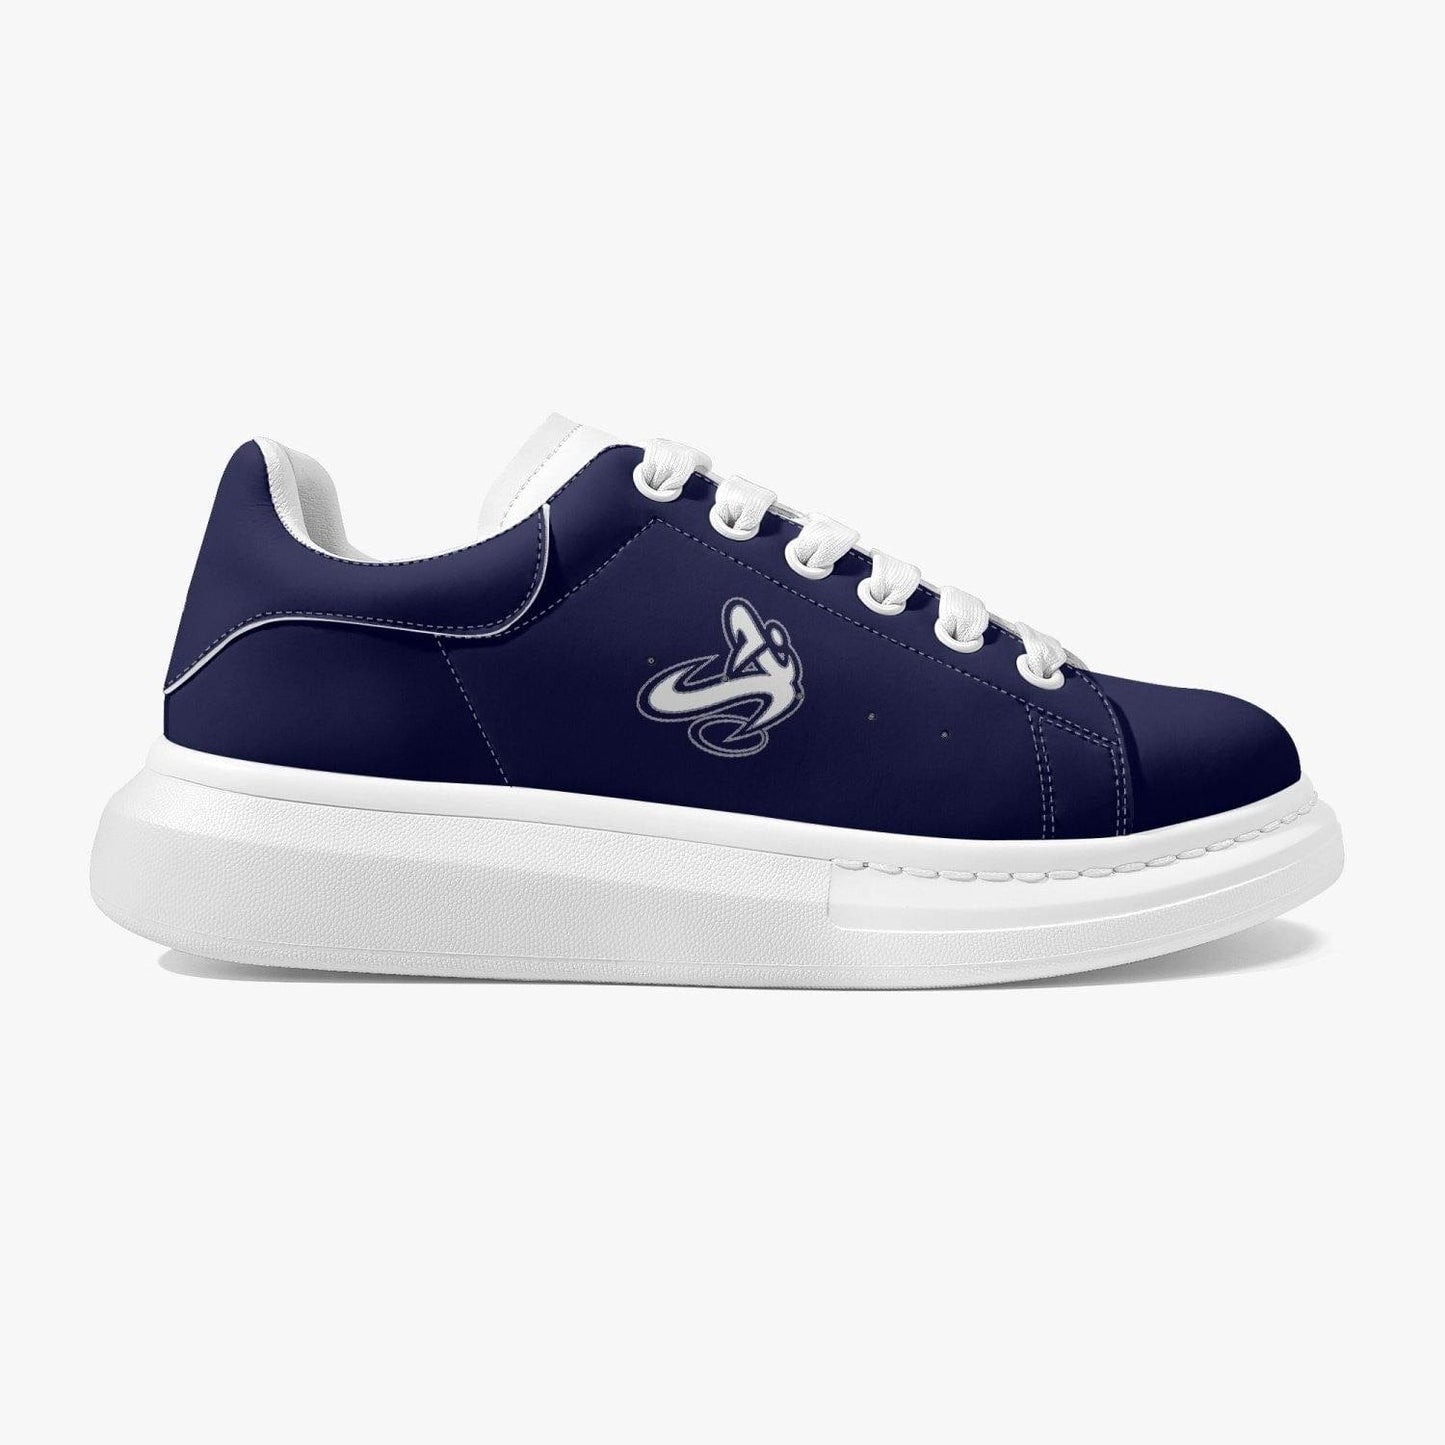 ATHLETIC APPARATUS NAVY BLUE LIFESTYLE LOW-TOP LEATHER SNEAKERS - Athletic Apparatus